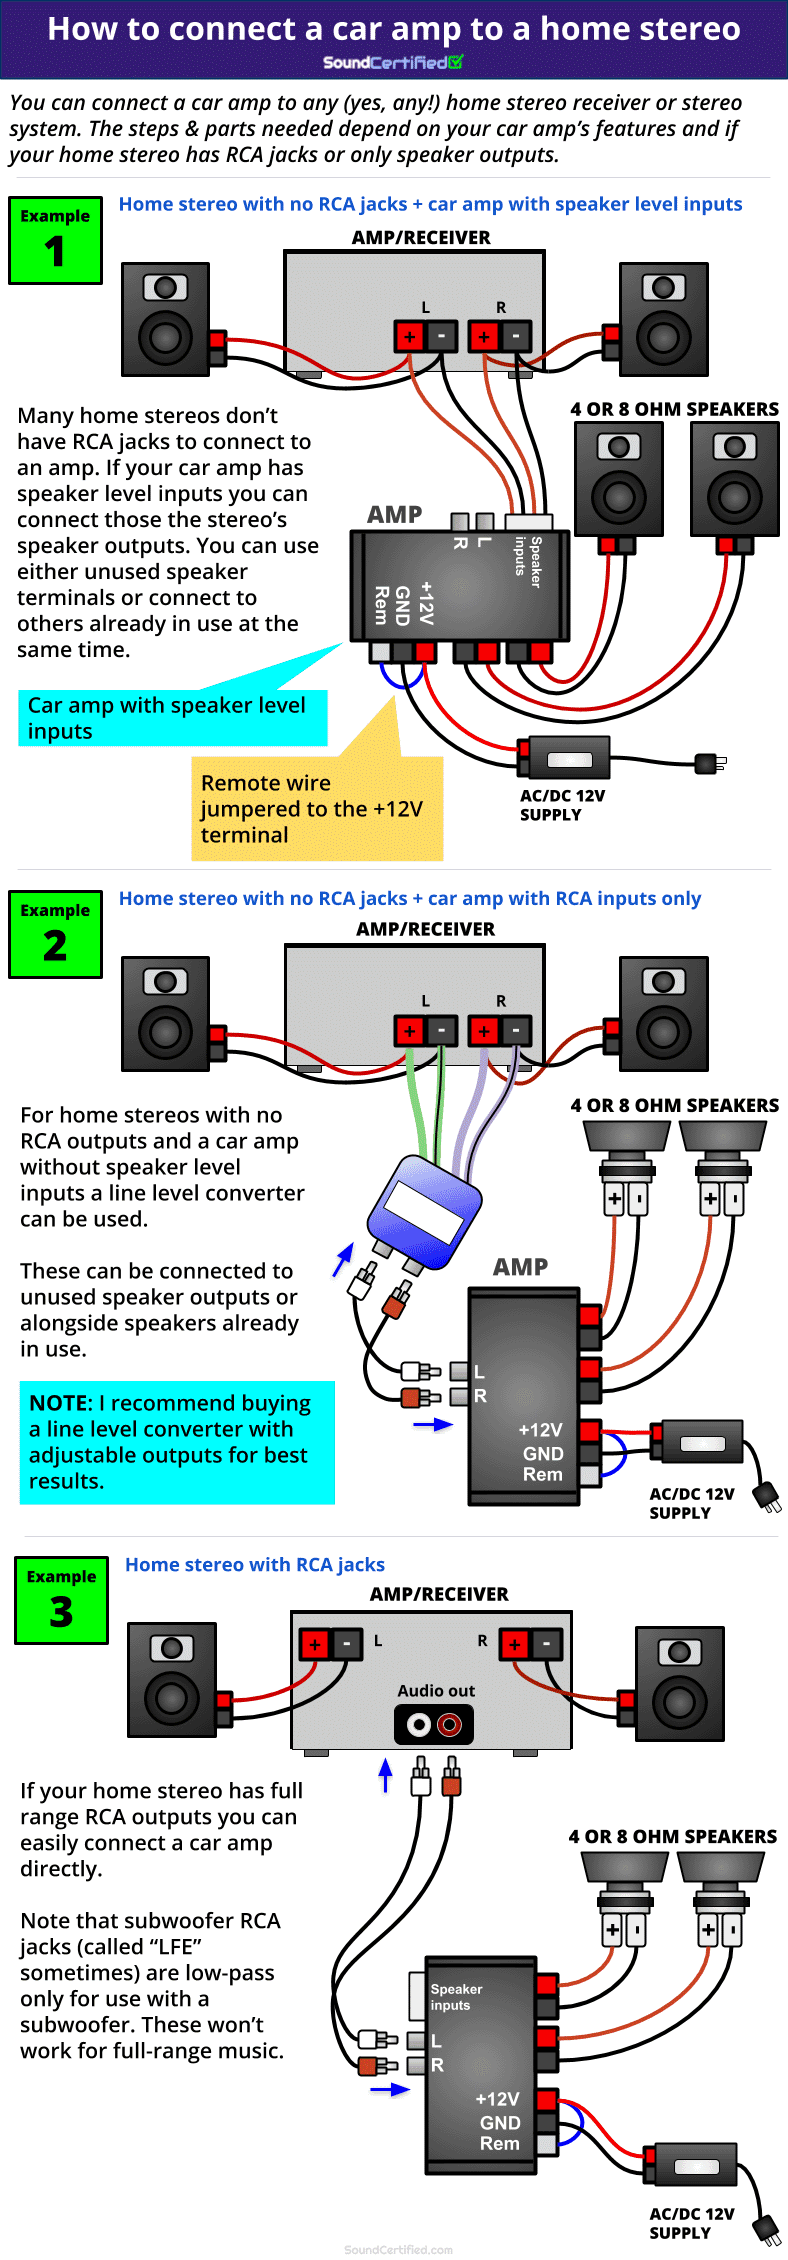 Car Amp To A Home Stereo